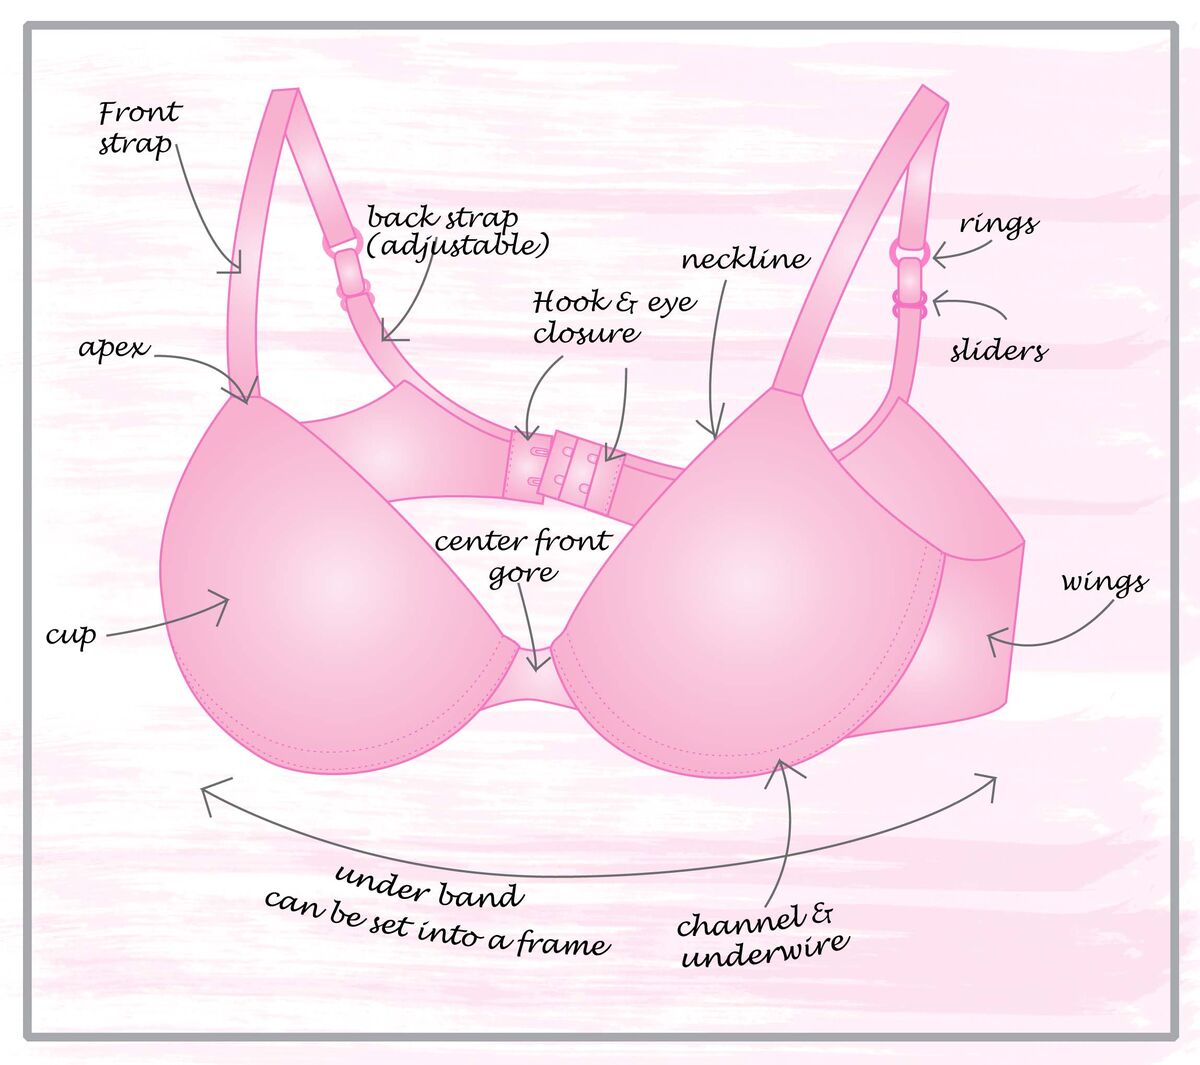 parts-of-a-bra-band